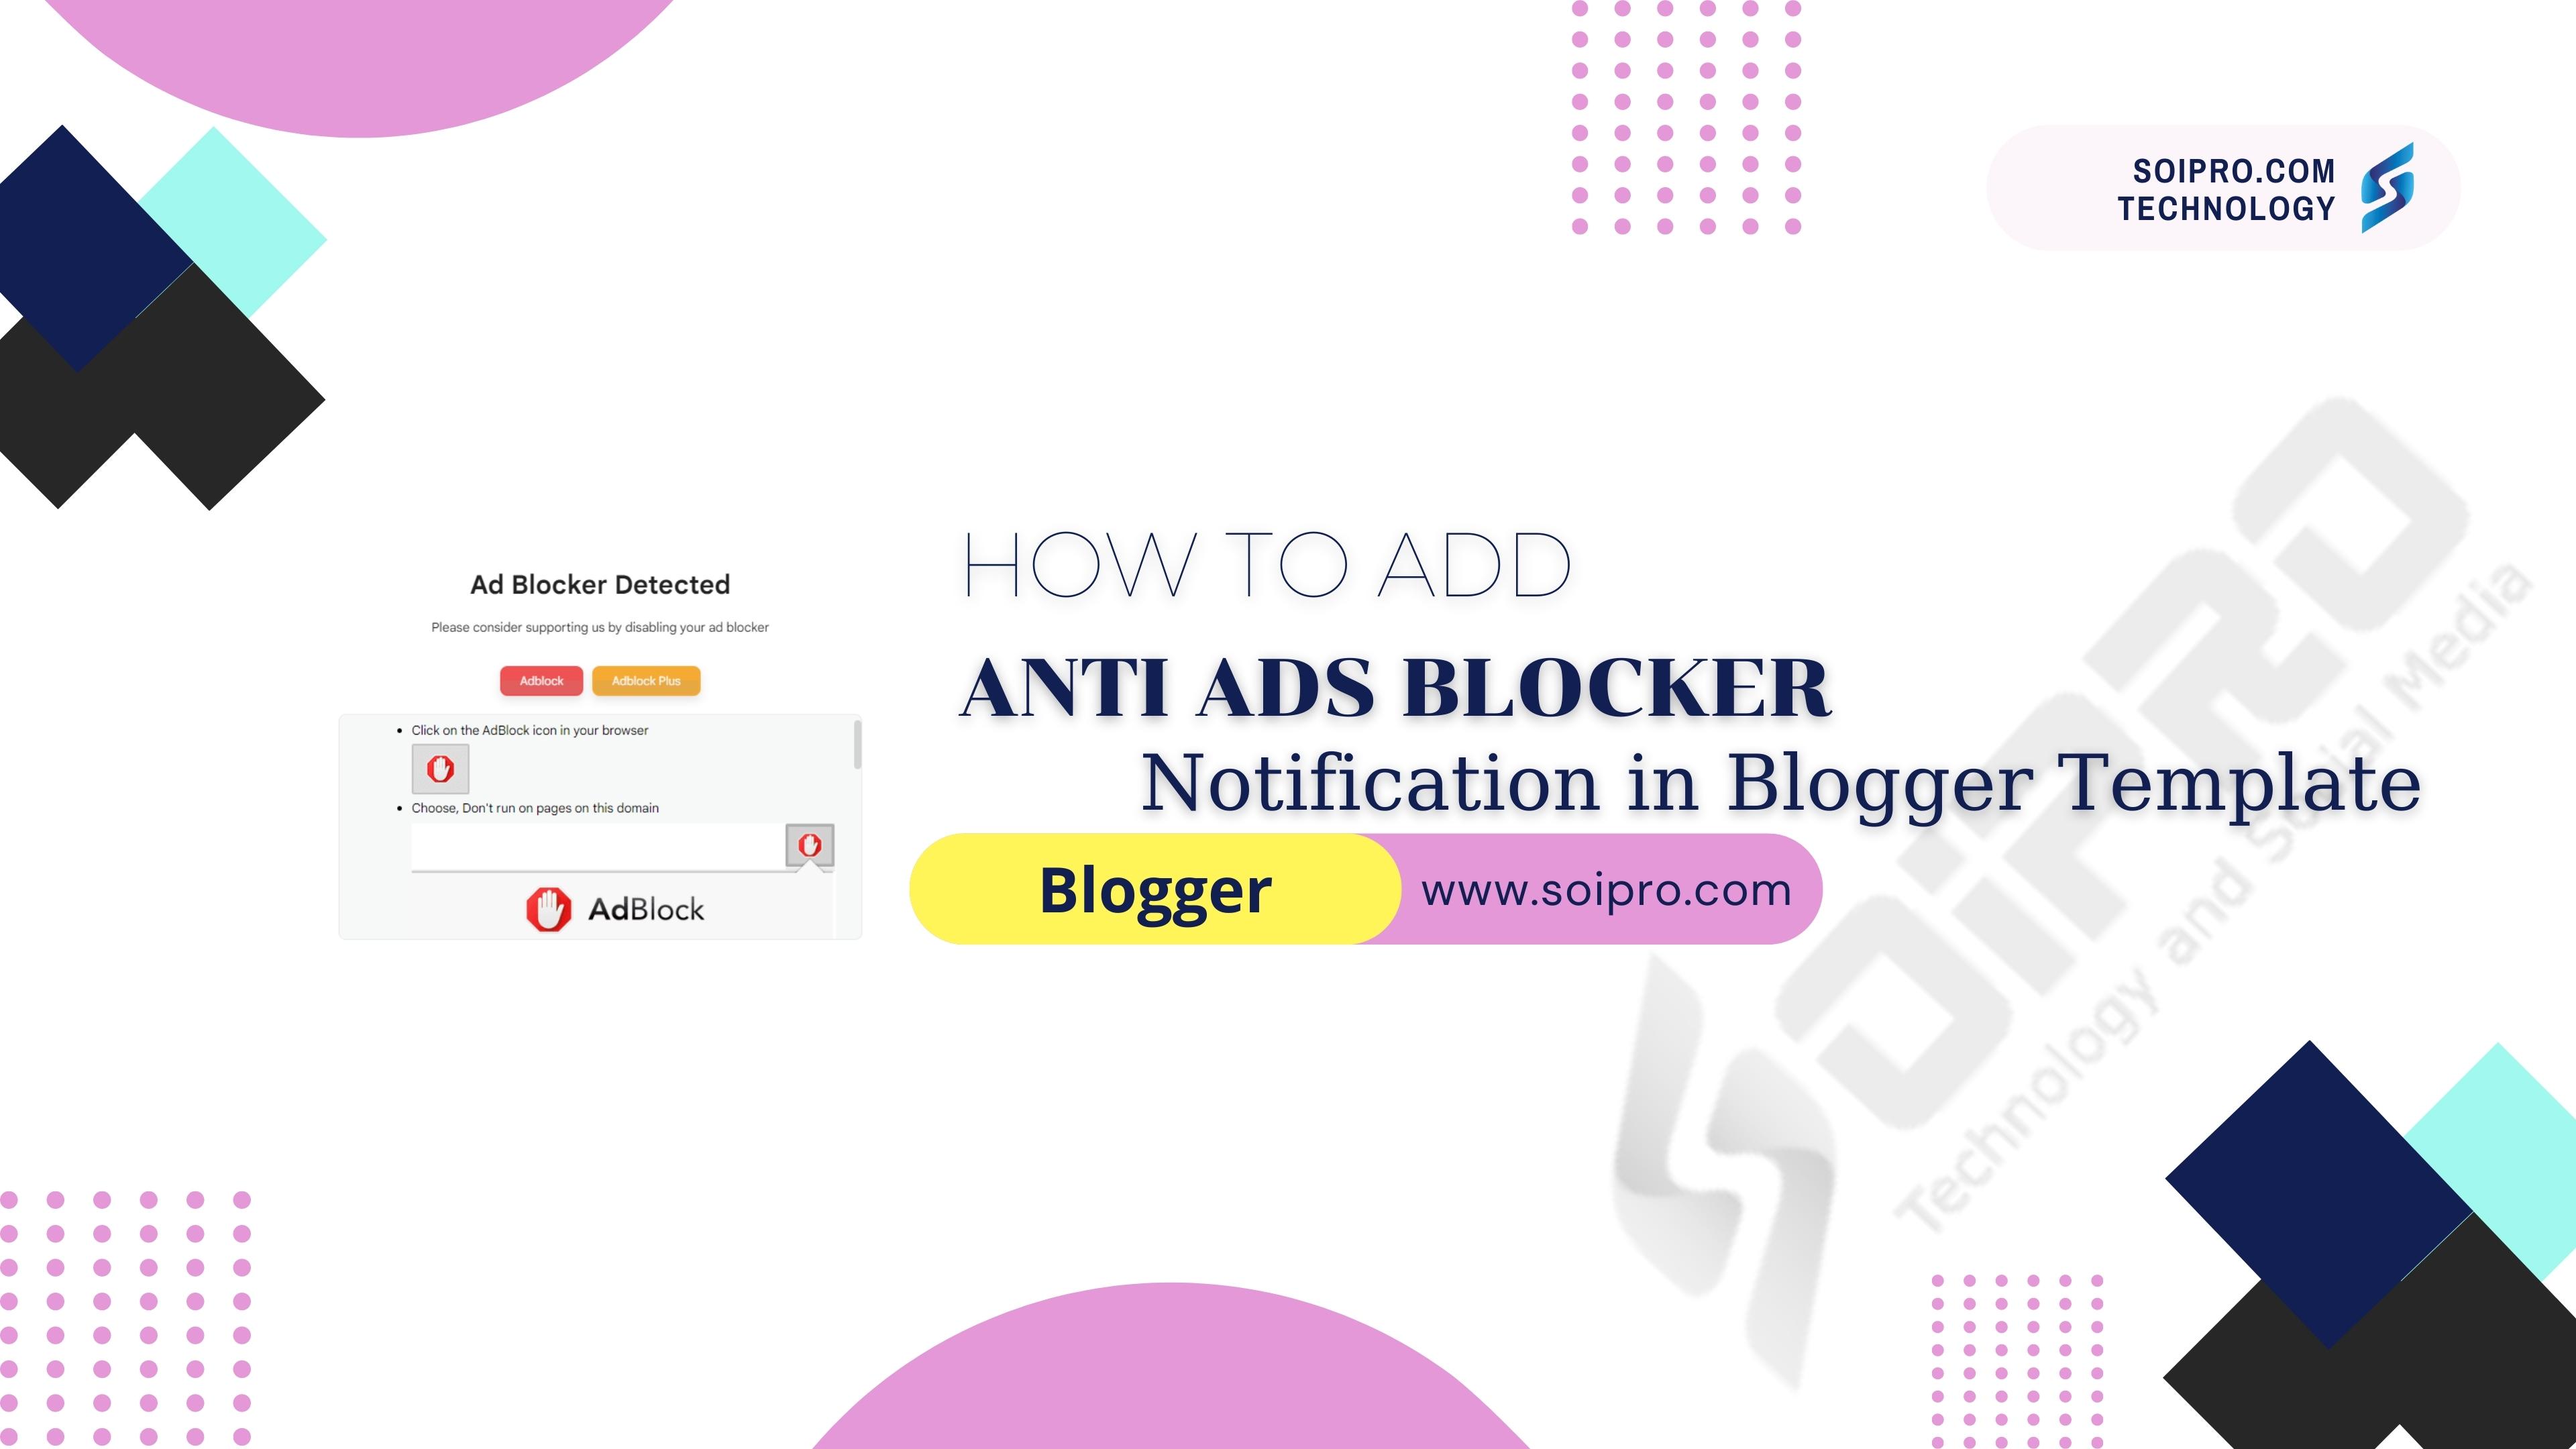 How to Add Anti Ads Blocker Notification in Blogger Template?